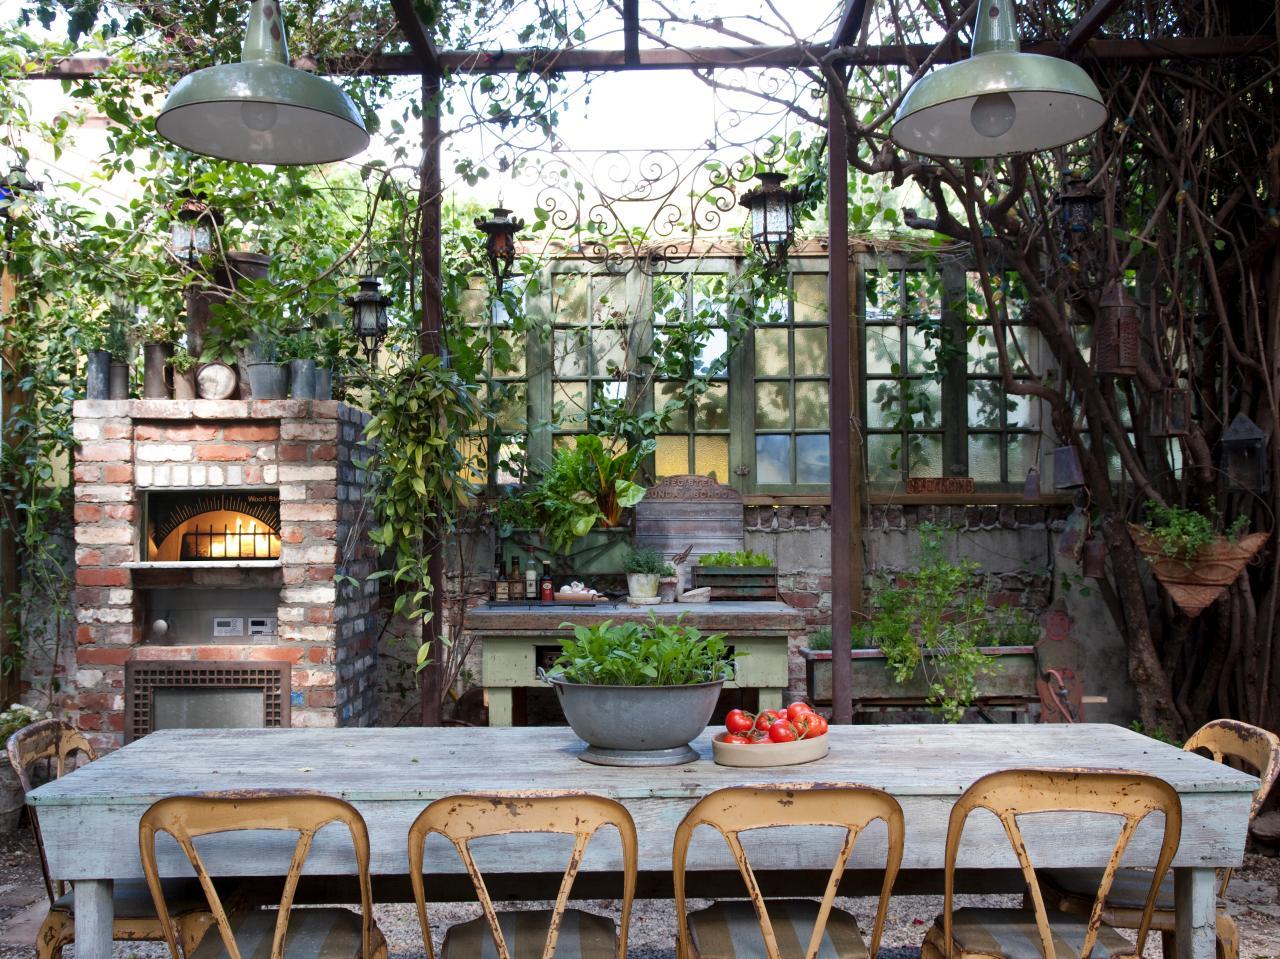 garden dining in gorgeous must see outdoor dining areas | lovelyspaces.com